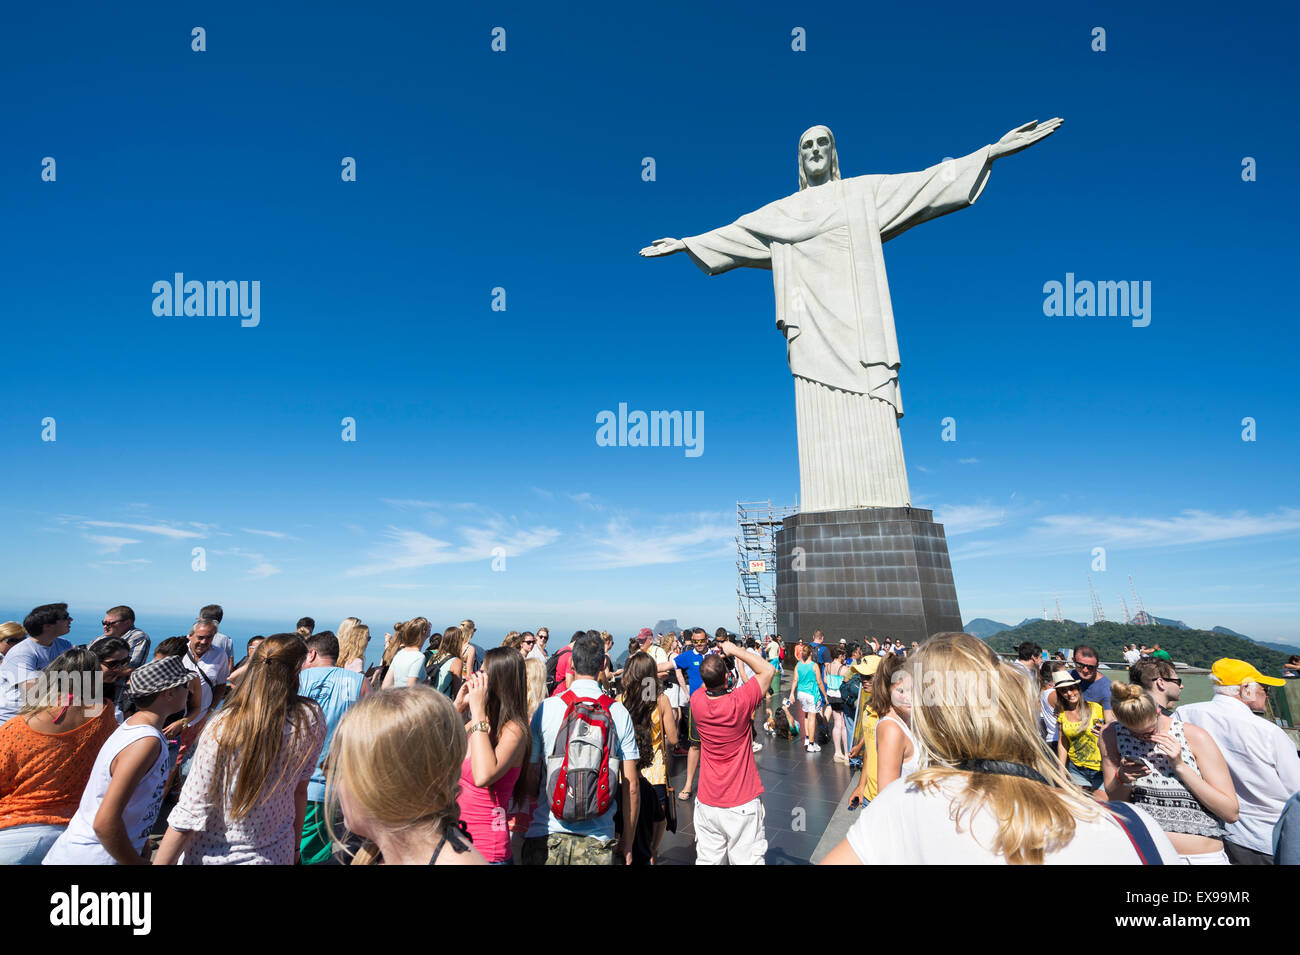 RIO DE JANEIRO, BRAZIL - MARCH 05, 2015: Groups of tourists take pictures on a bright morning at the Christ the Redeemer statue. Stock Photo